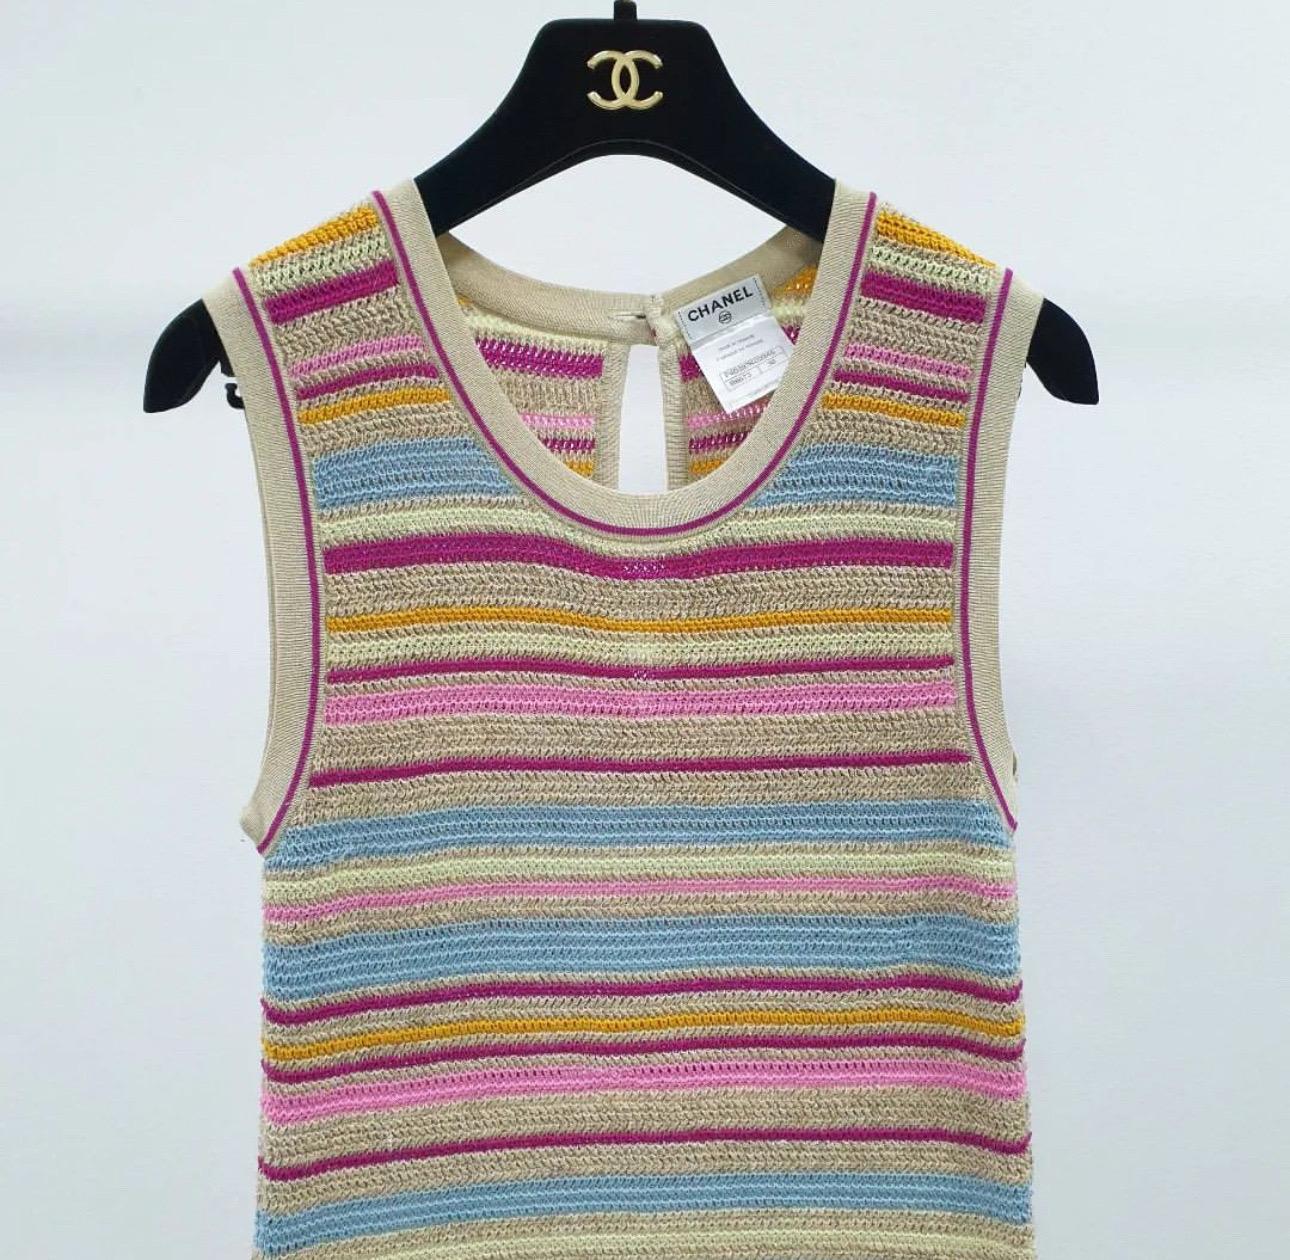 Beautiful Chanel Multi coloured stripe dress featuring crewneck neckline. 

This stunning dress would look amazing to wear on the beach paired with lovely sandals.

Sz.36

Very good condition.